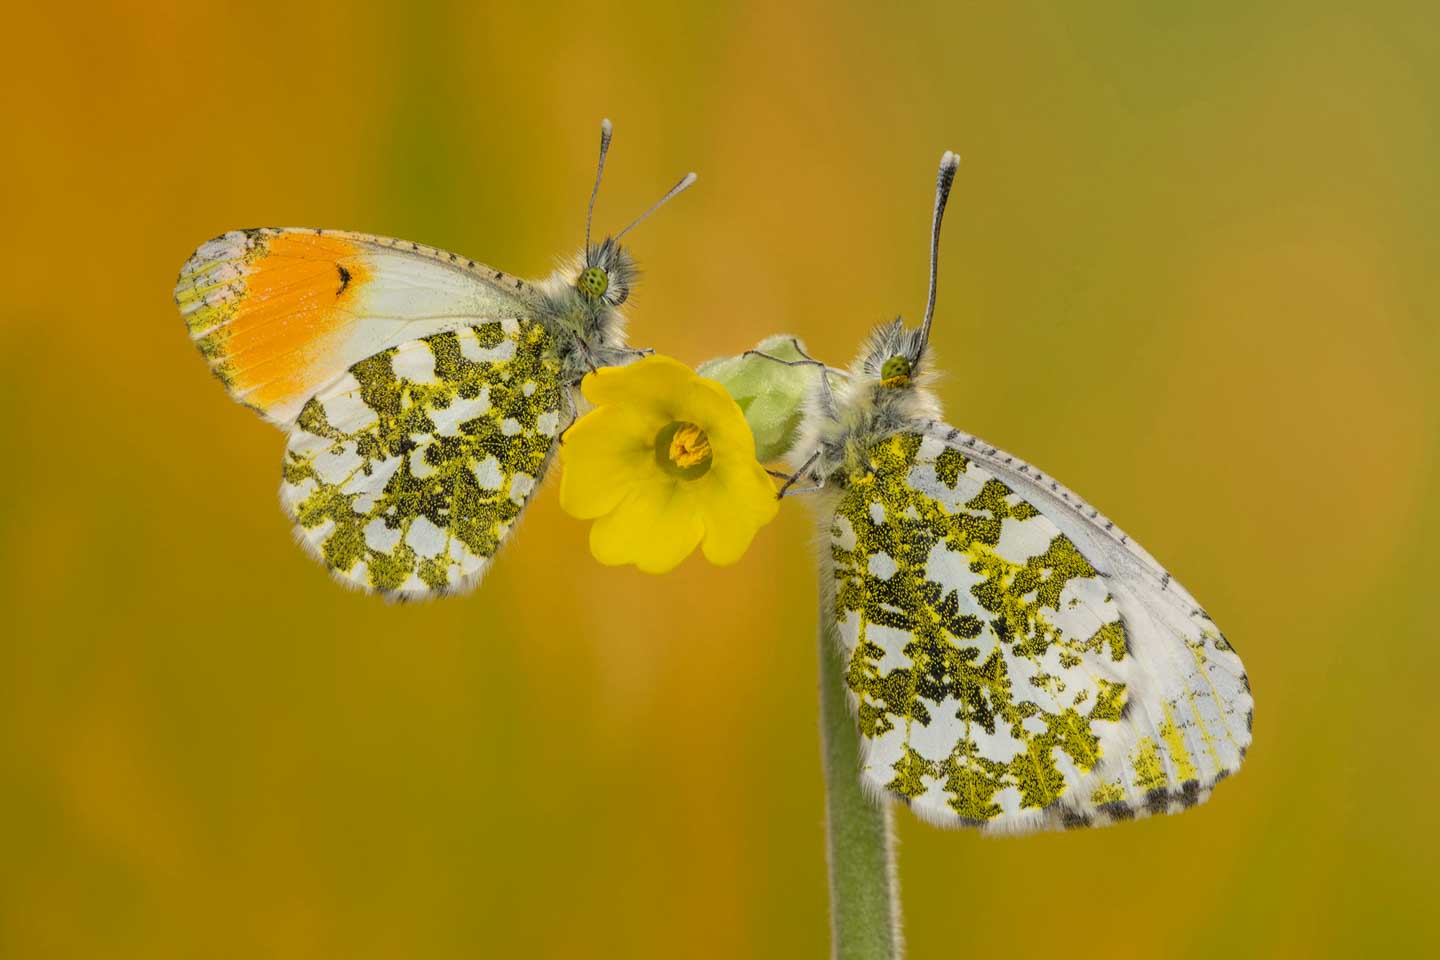 CJPOTY round 3 (March 2023) shortlisted image - butterflies